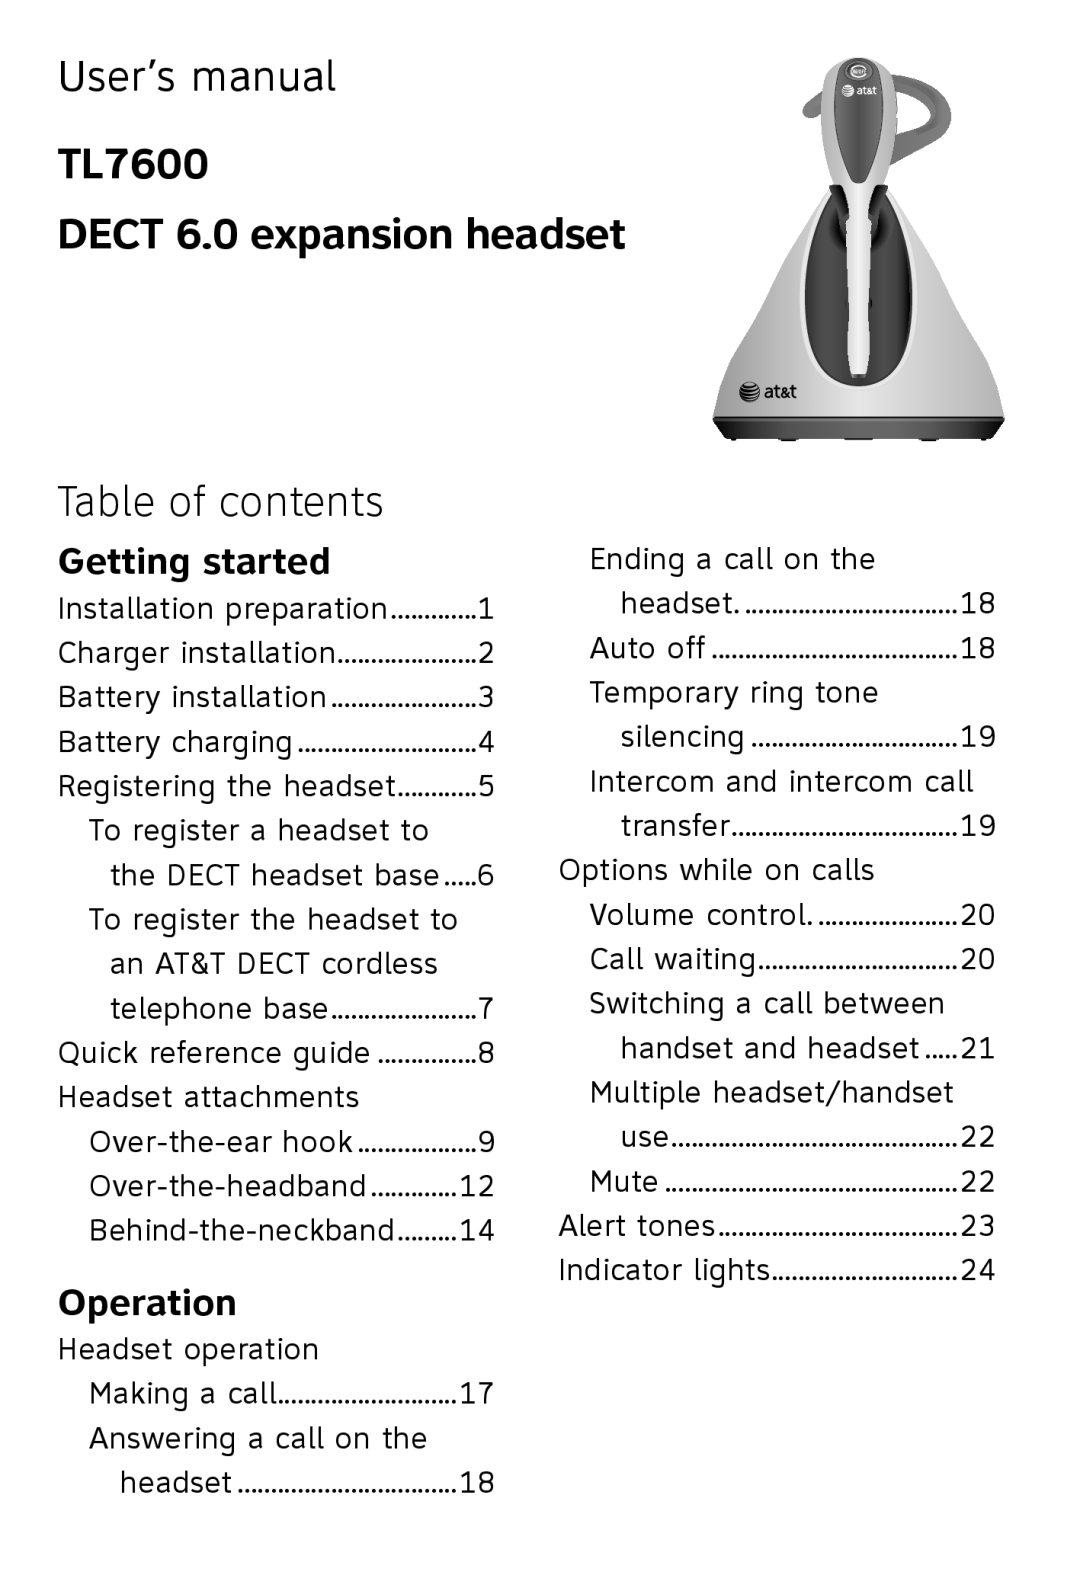 AT&T user manual Table of contents, Getting started, Operation, TL7600 DECT 6.0 expansion headset 